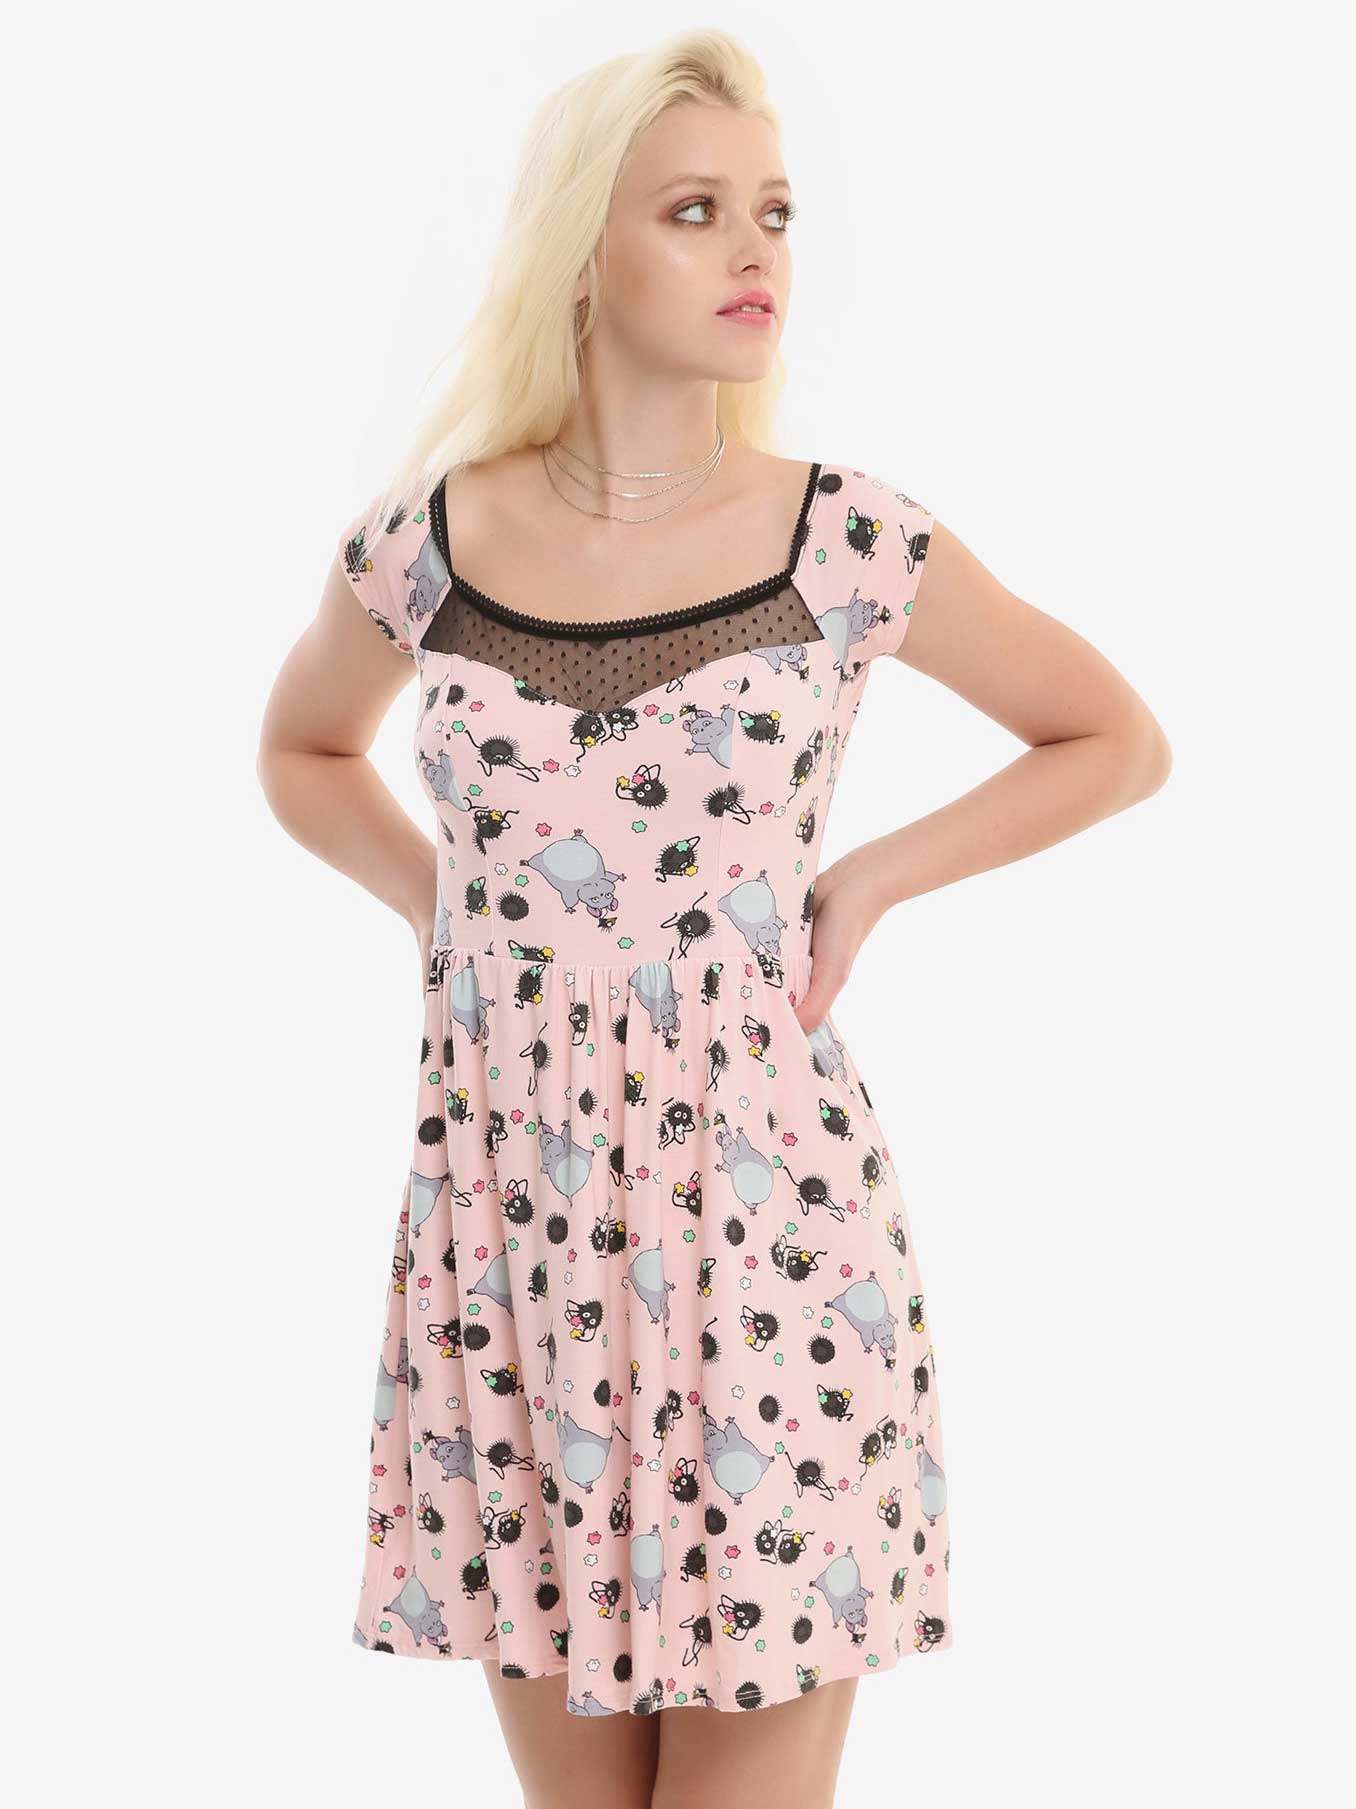 pink dress with cartoon animals and black lace accent